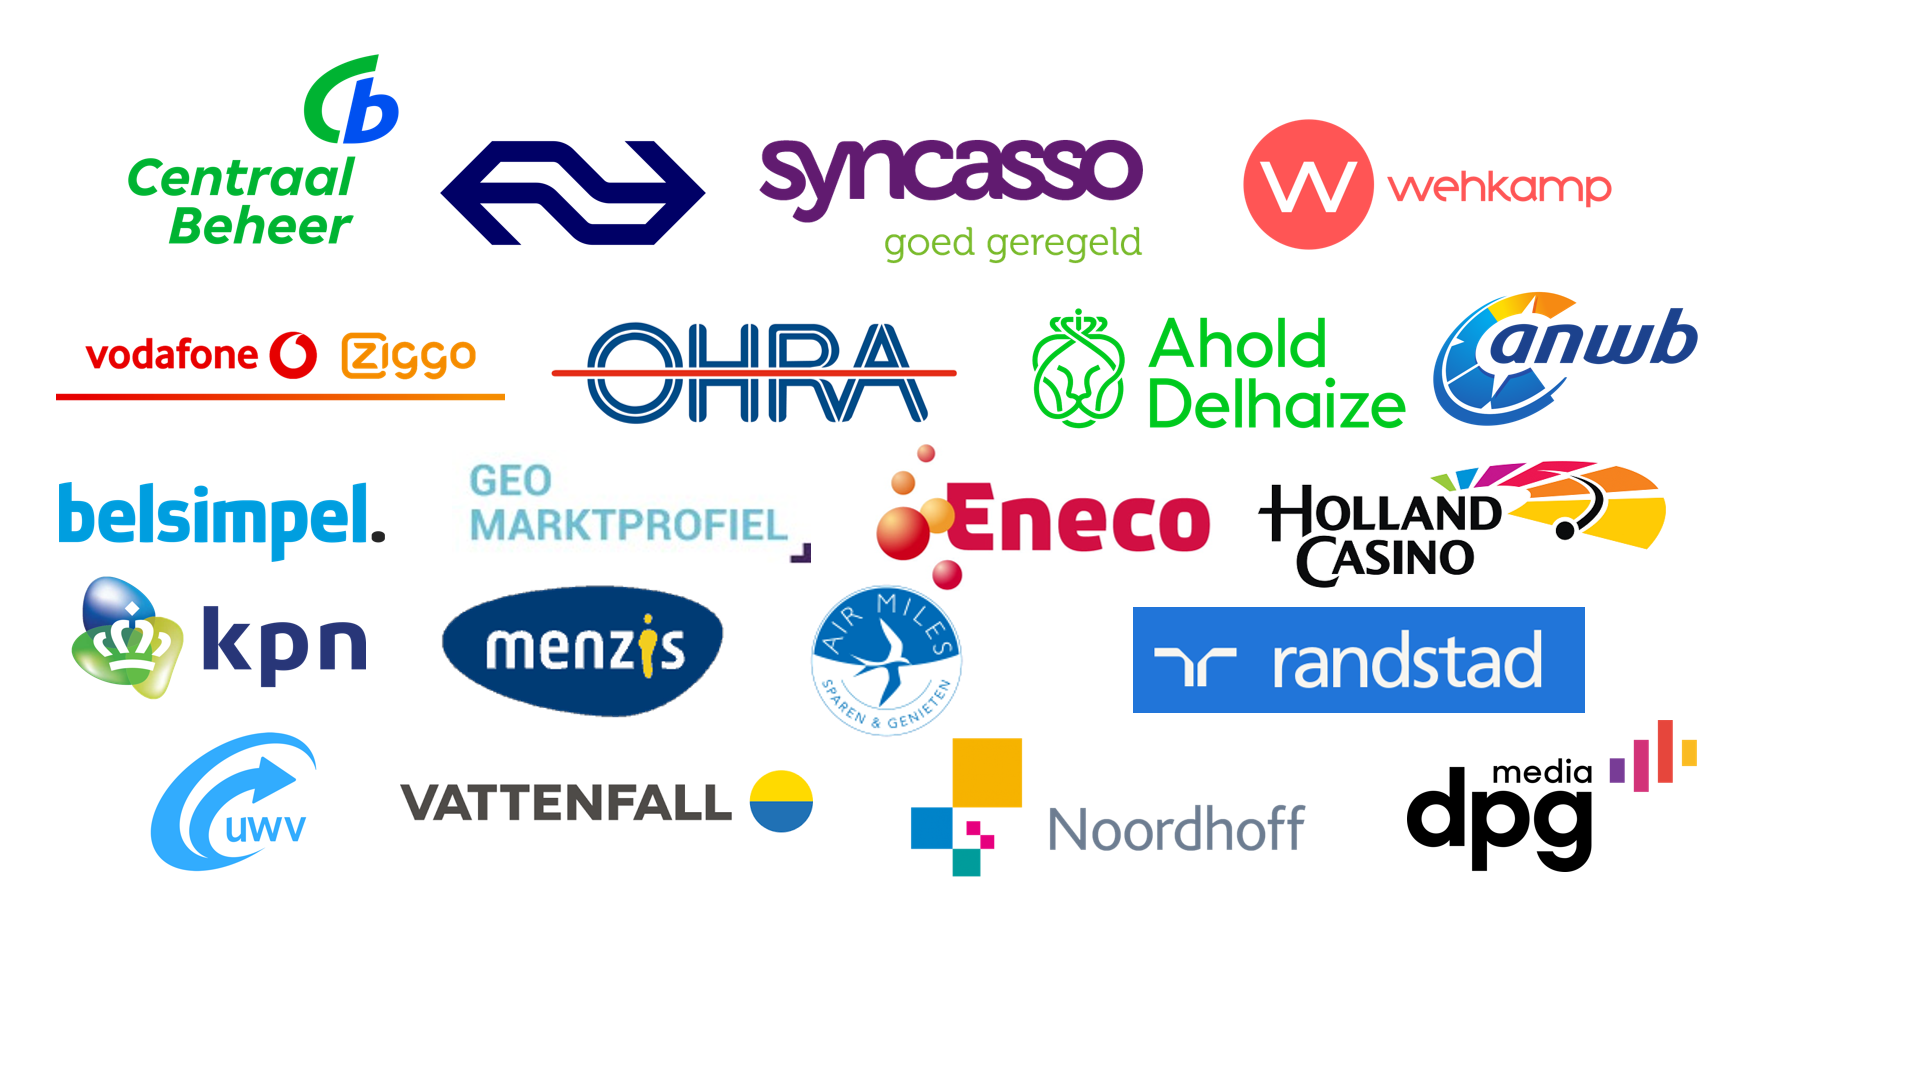 Current overview of all the leading companies that are already members of the Customer Insights Center of the University of Groningen (RUGCIC).